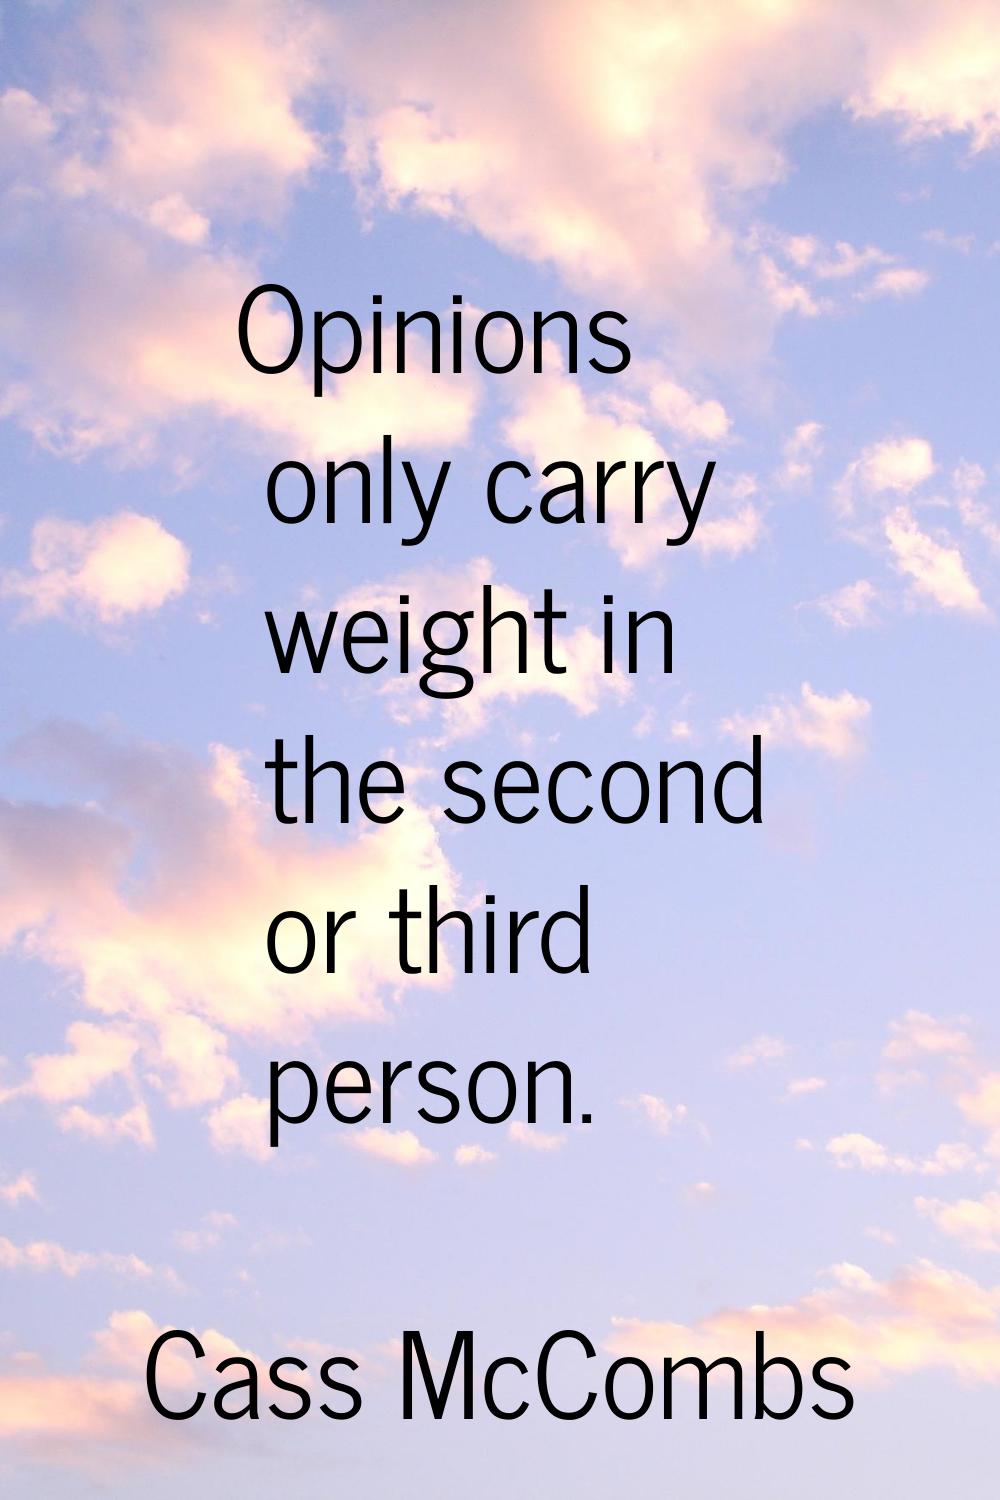 Opinions only carry weight in the second or third person.